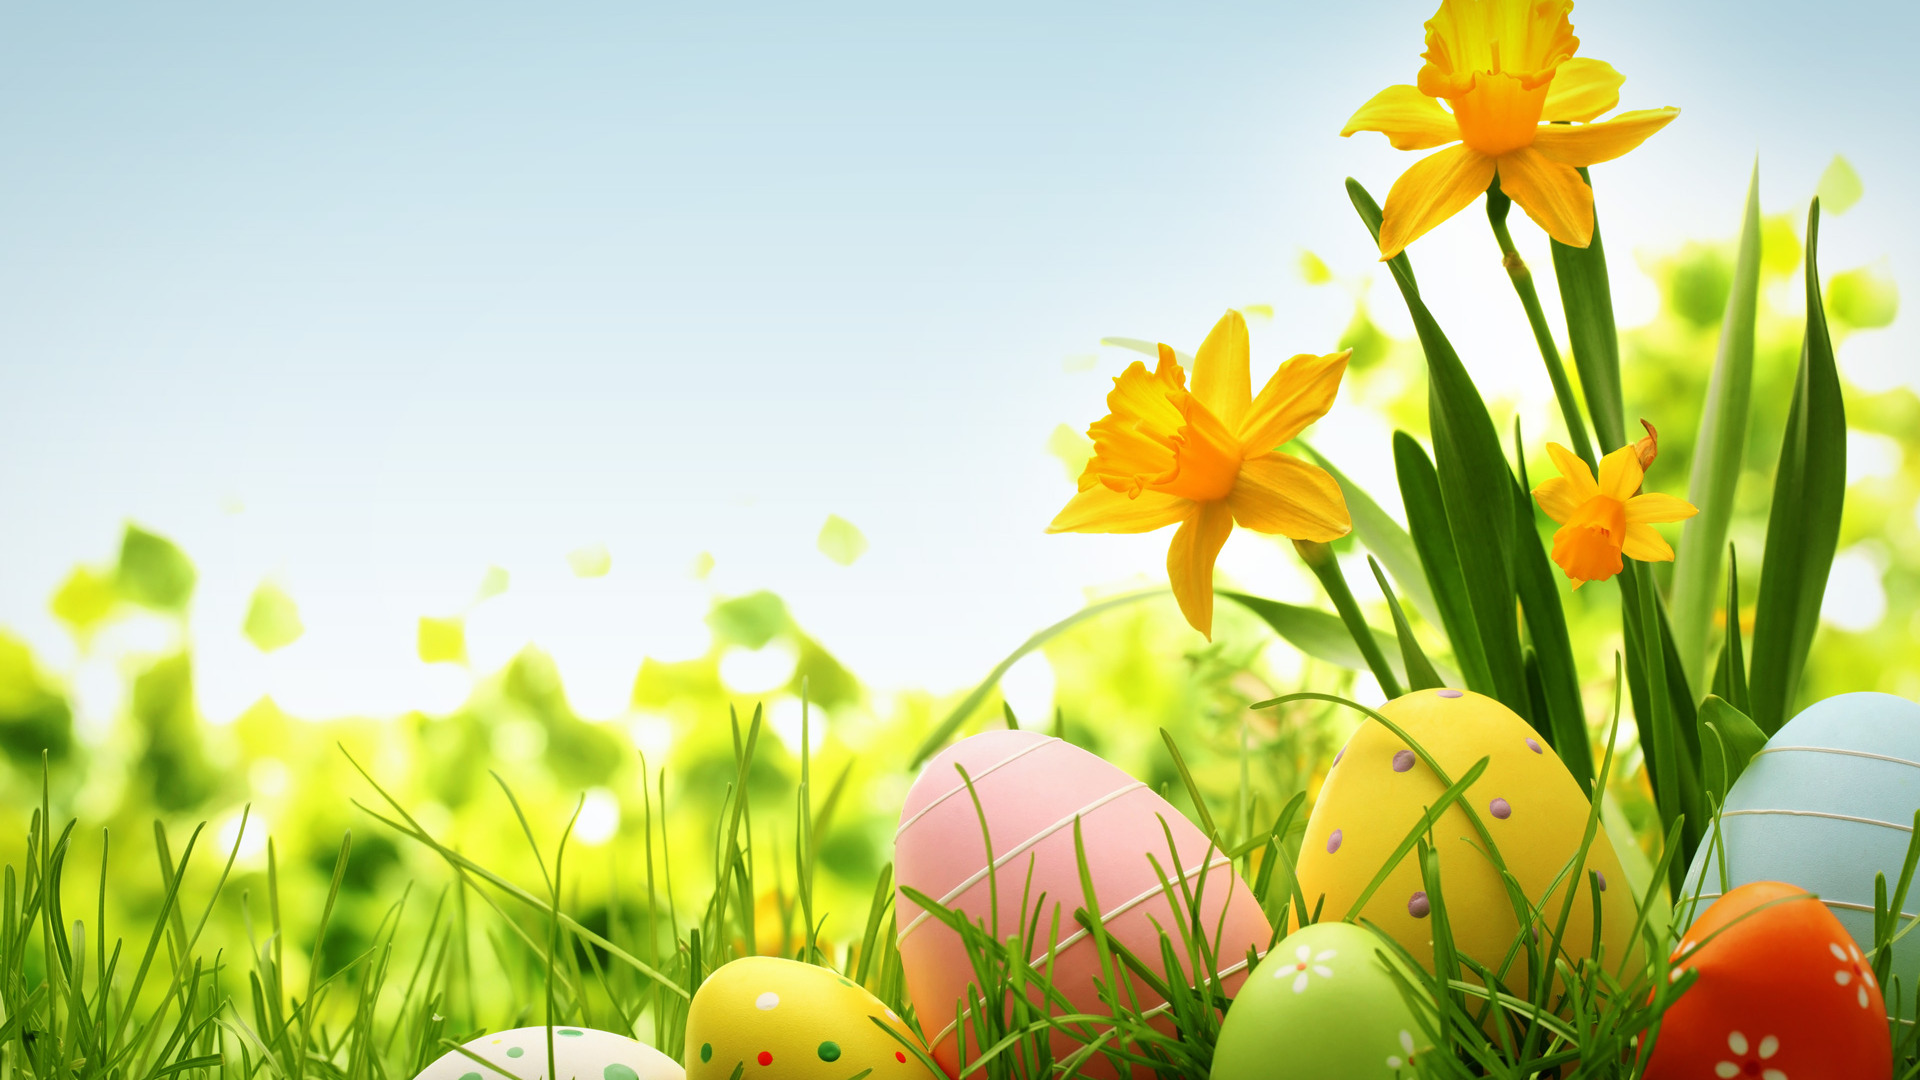 Colorful Easter Eggs Clipart - wallpaper.